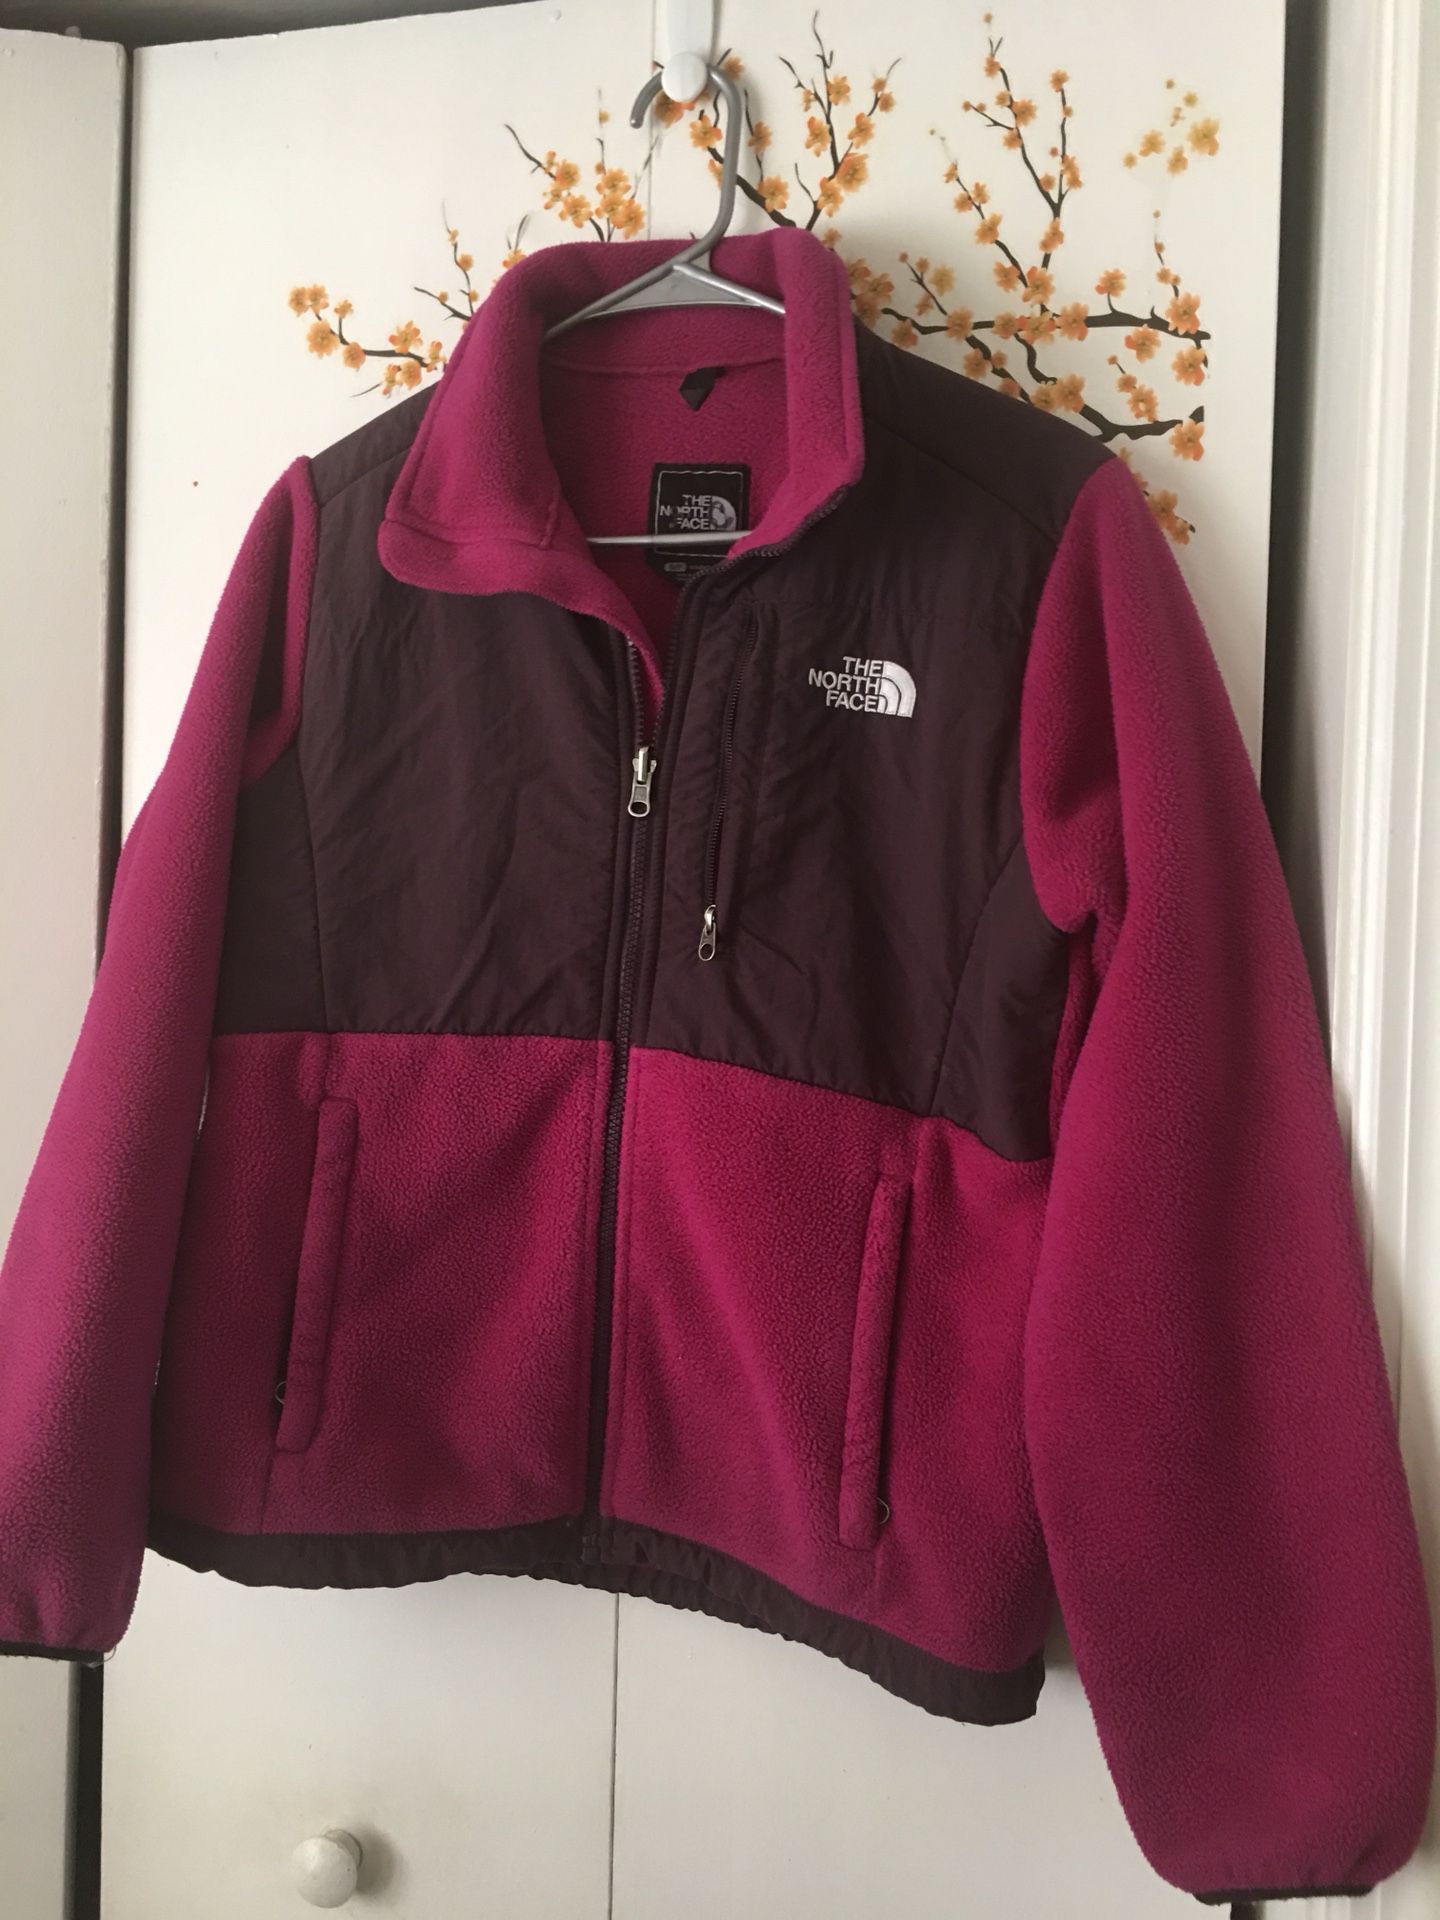 The North Face Small women's Jacket